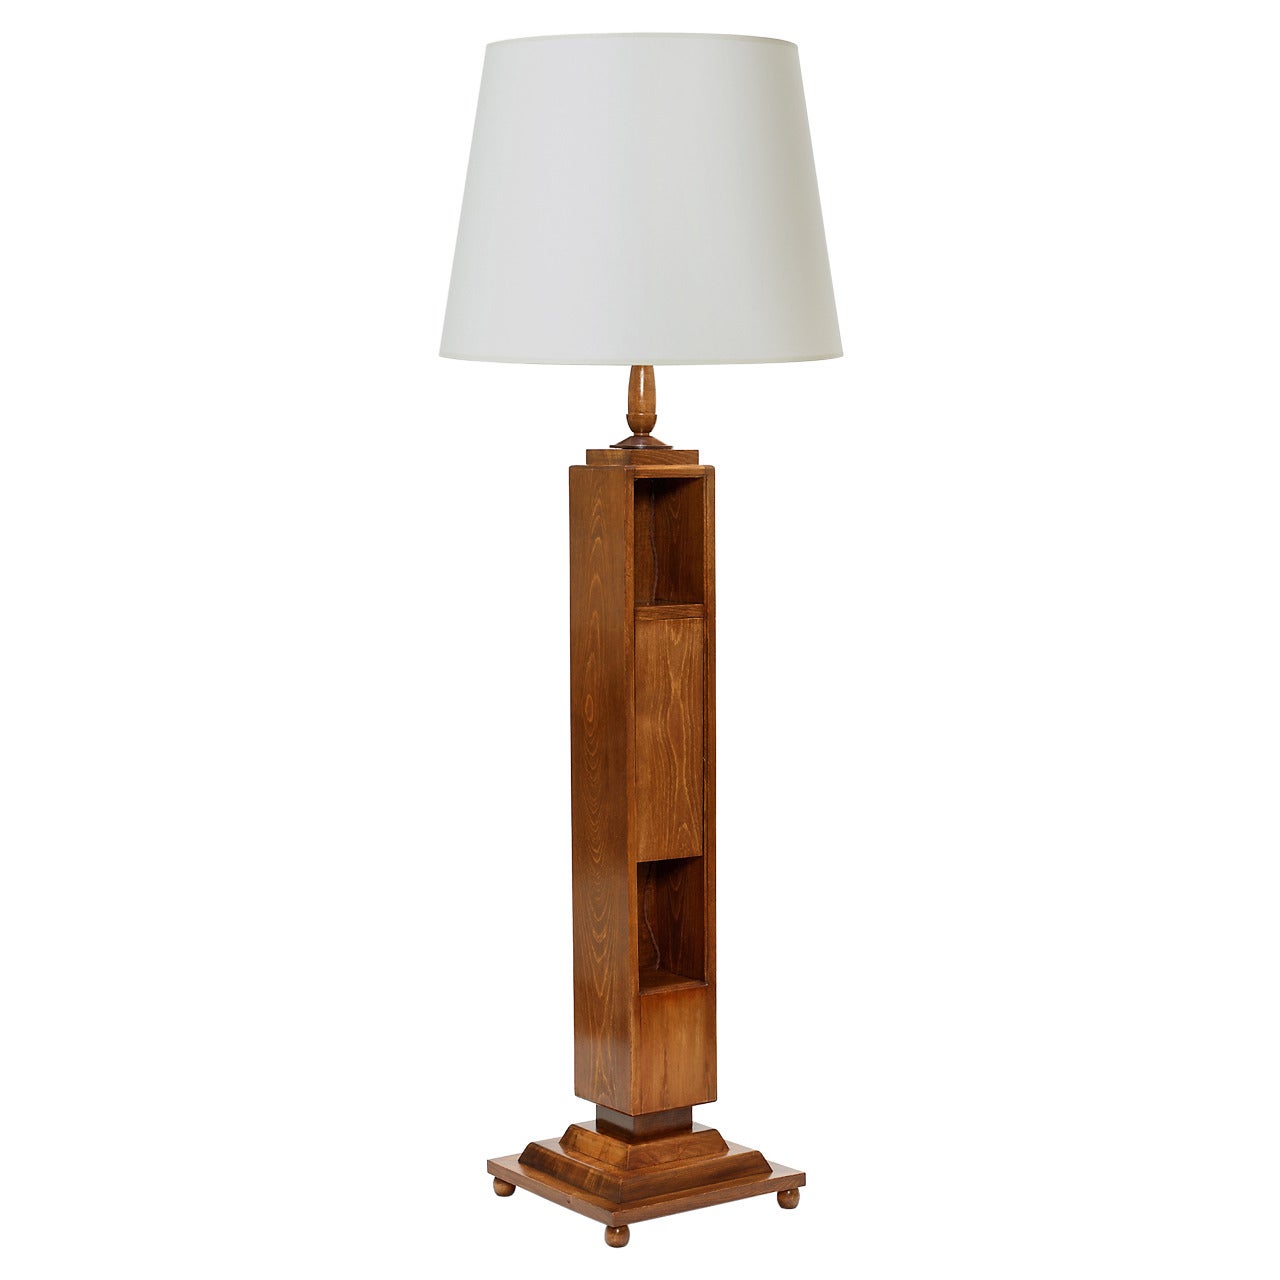 Standing Lamp with Integrated Storage in Beech by DIM For Sale